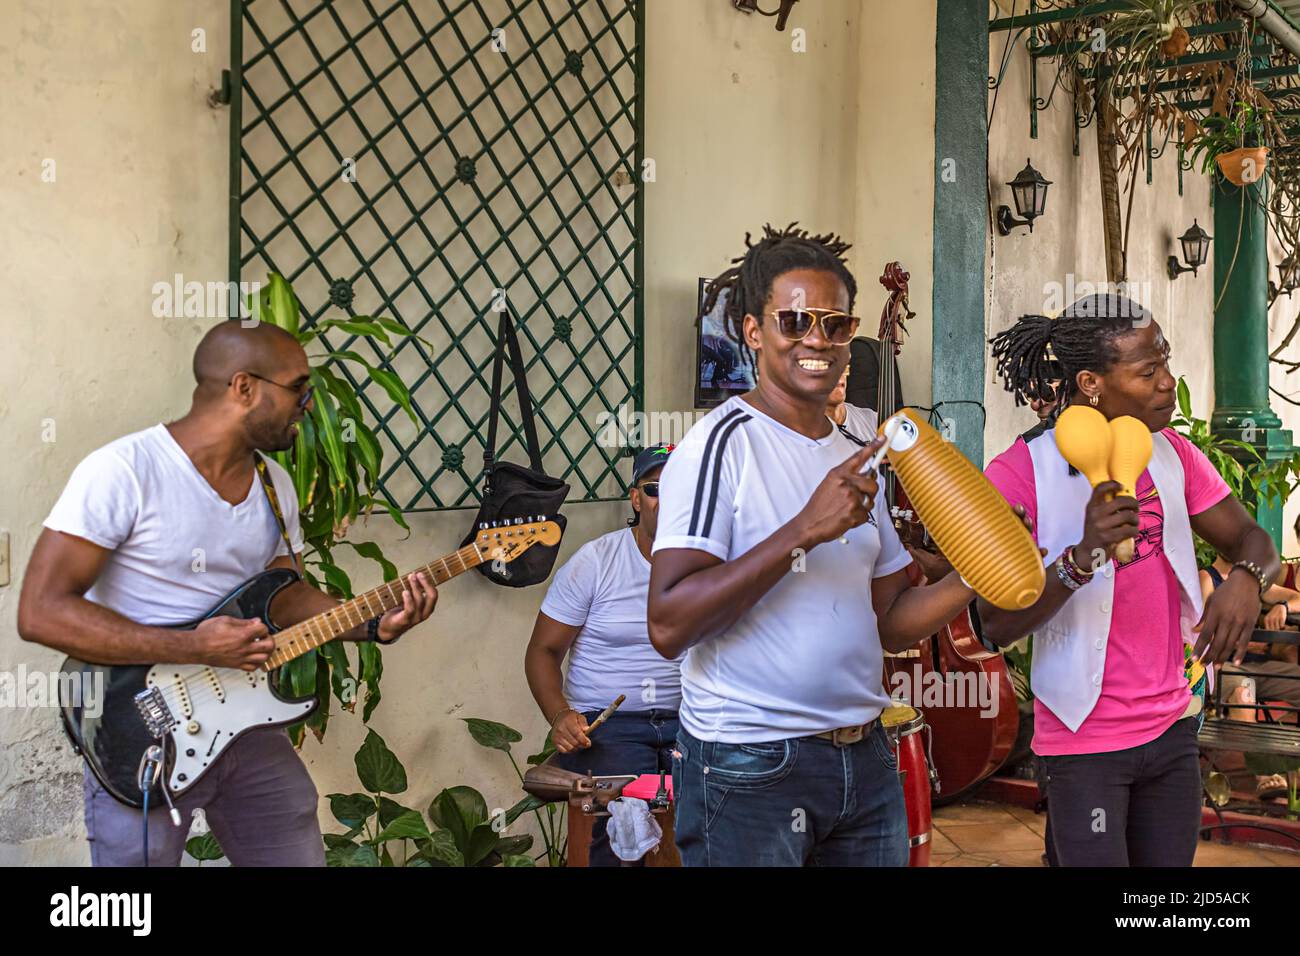 A Cuban Band performs outside a street cafe in Old Havana, Cuba Stock Photo